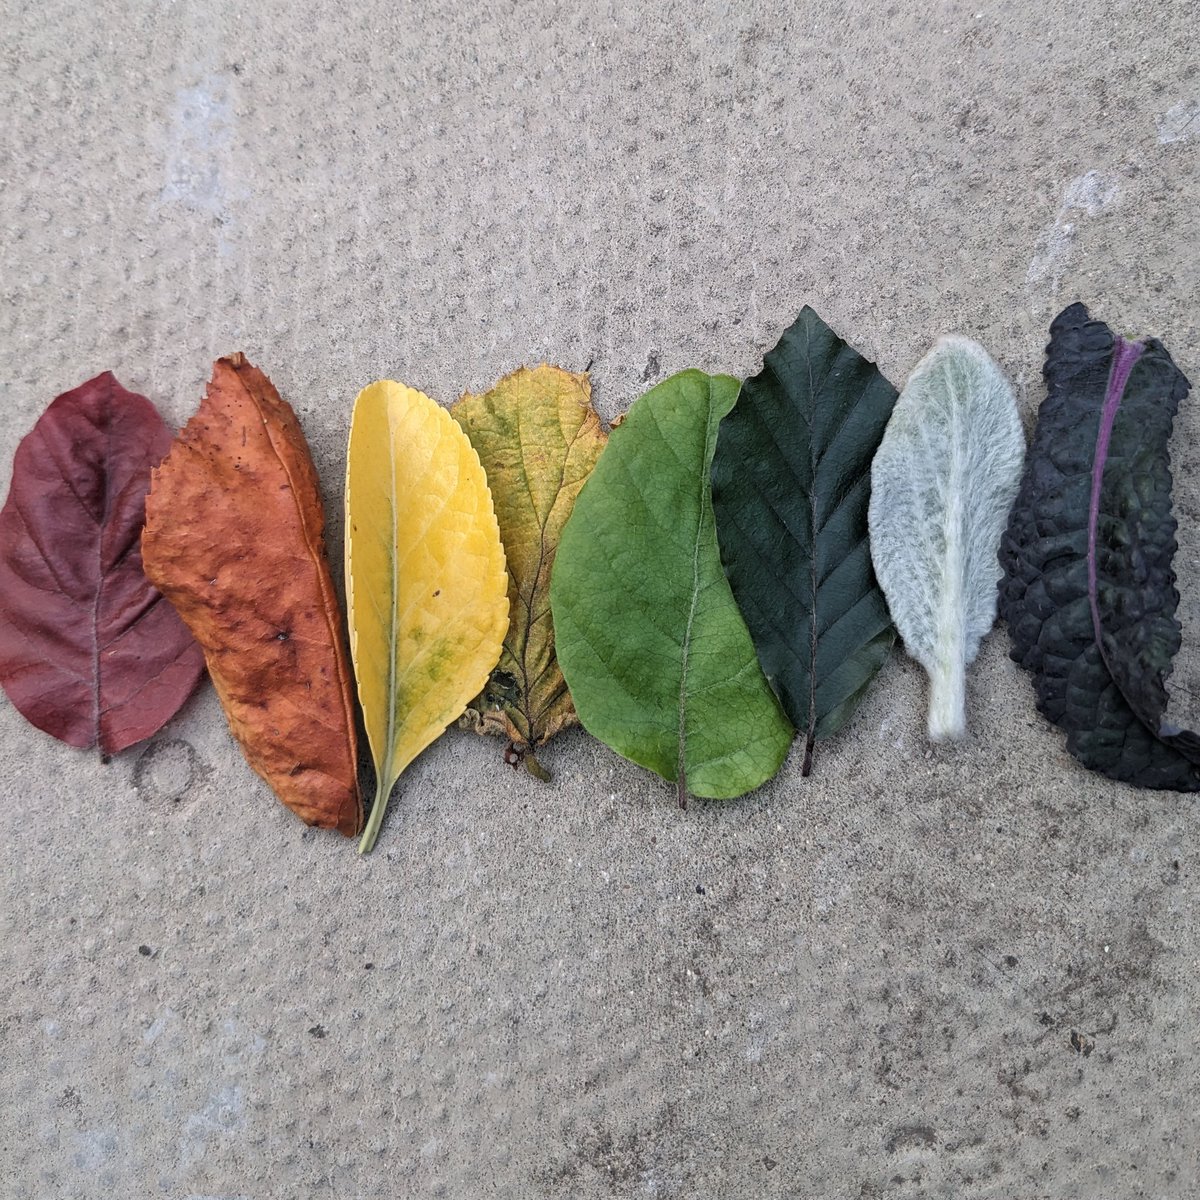 Today I collected some leaves on my walk back from the tube #ArrangingRainbows